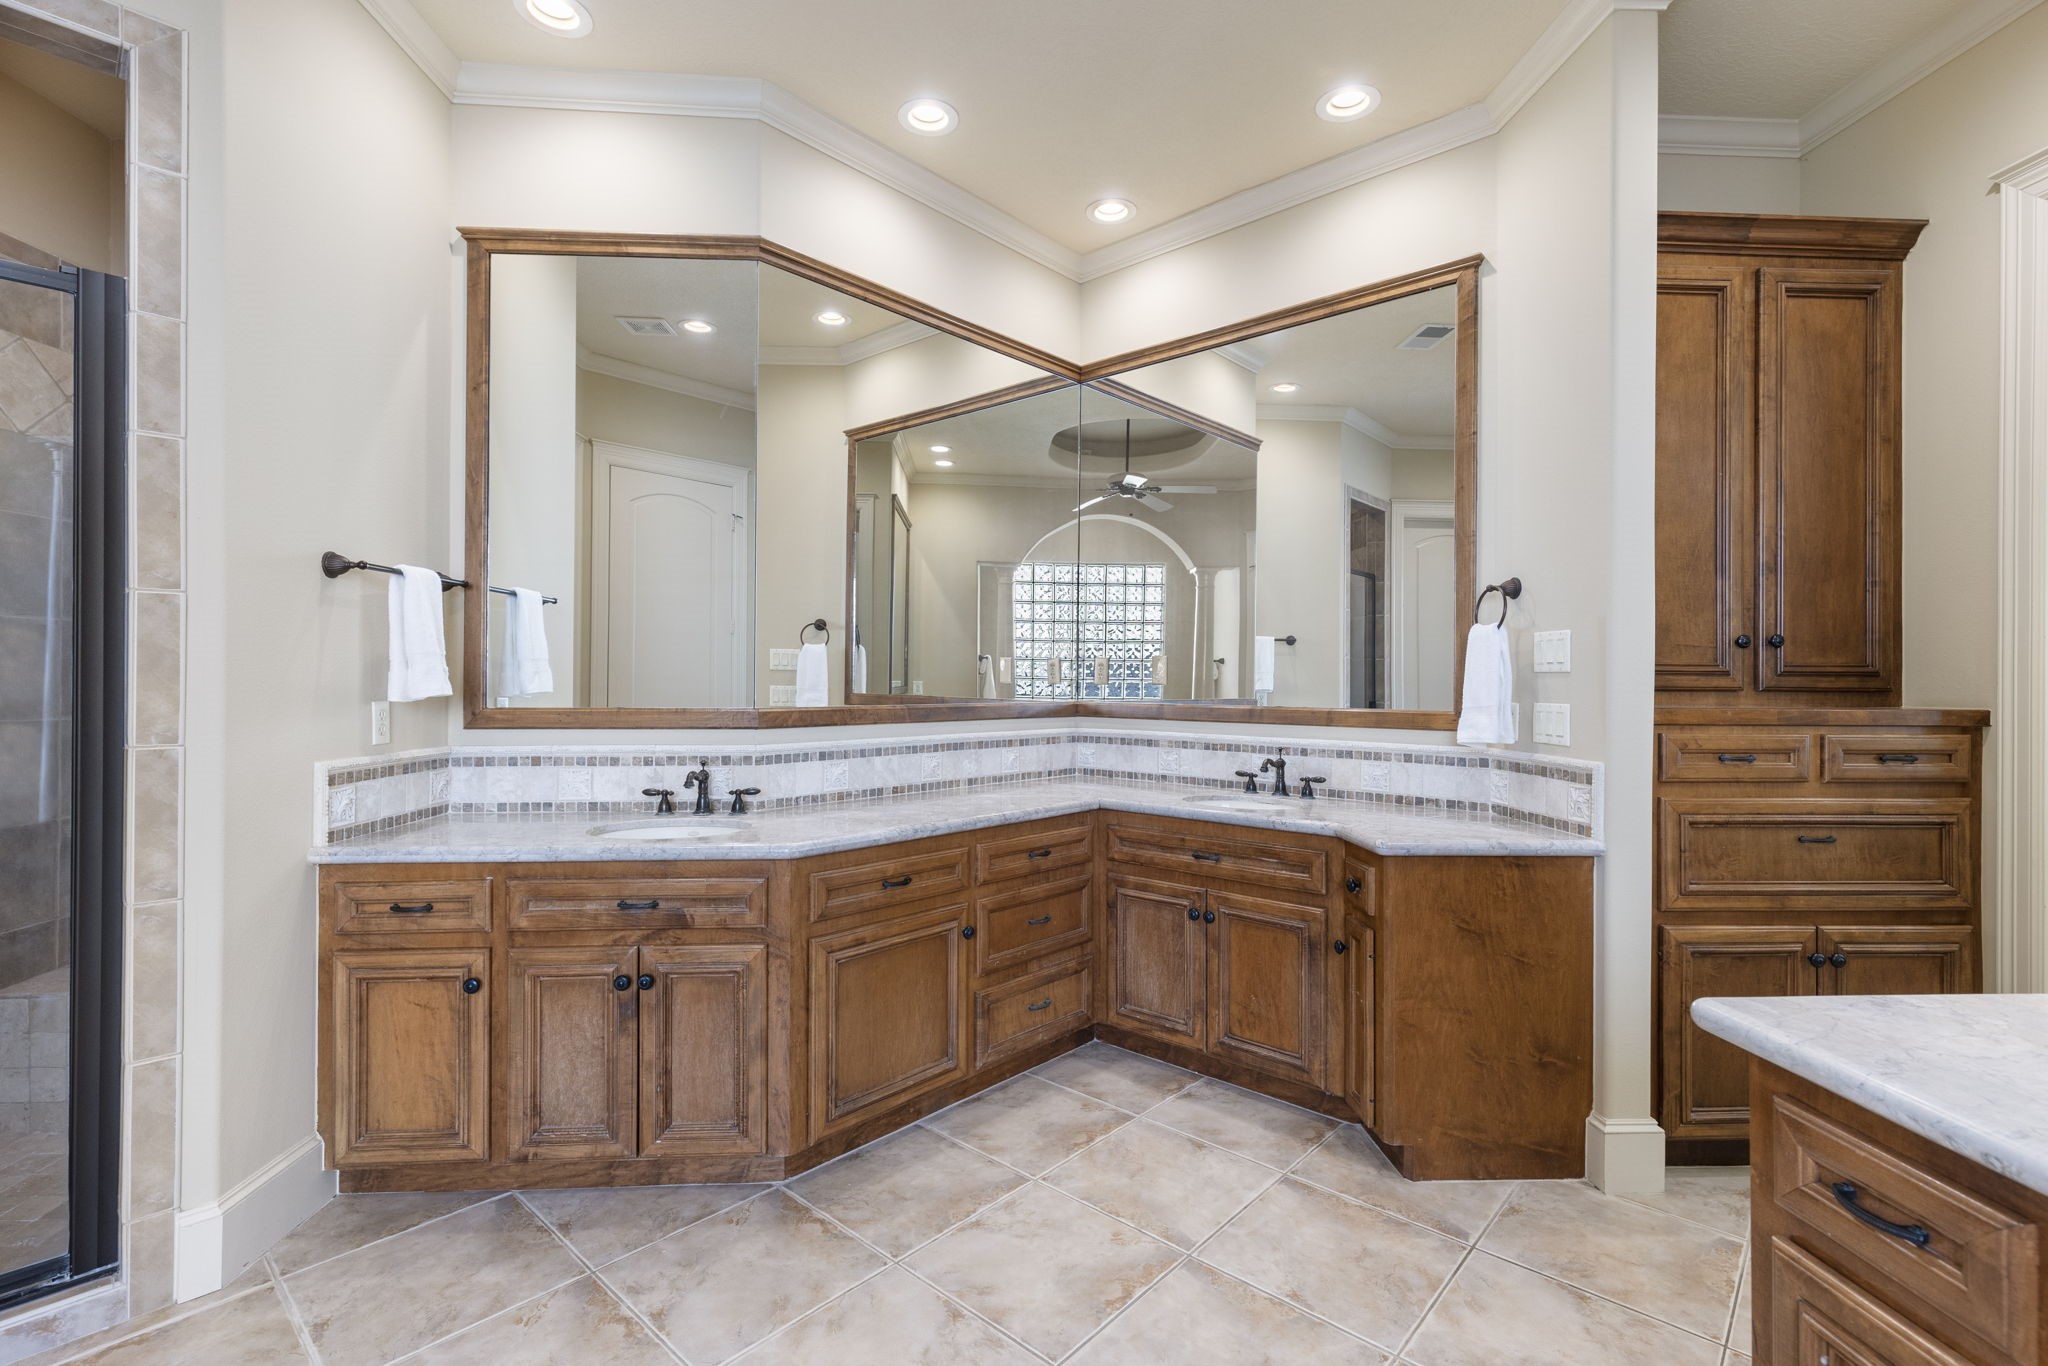 The spacious primary bathroom has high ceilings with recessed lighting, stone countertops accented with tile bordered backsplash and rubbed bronze hardware.